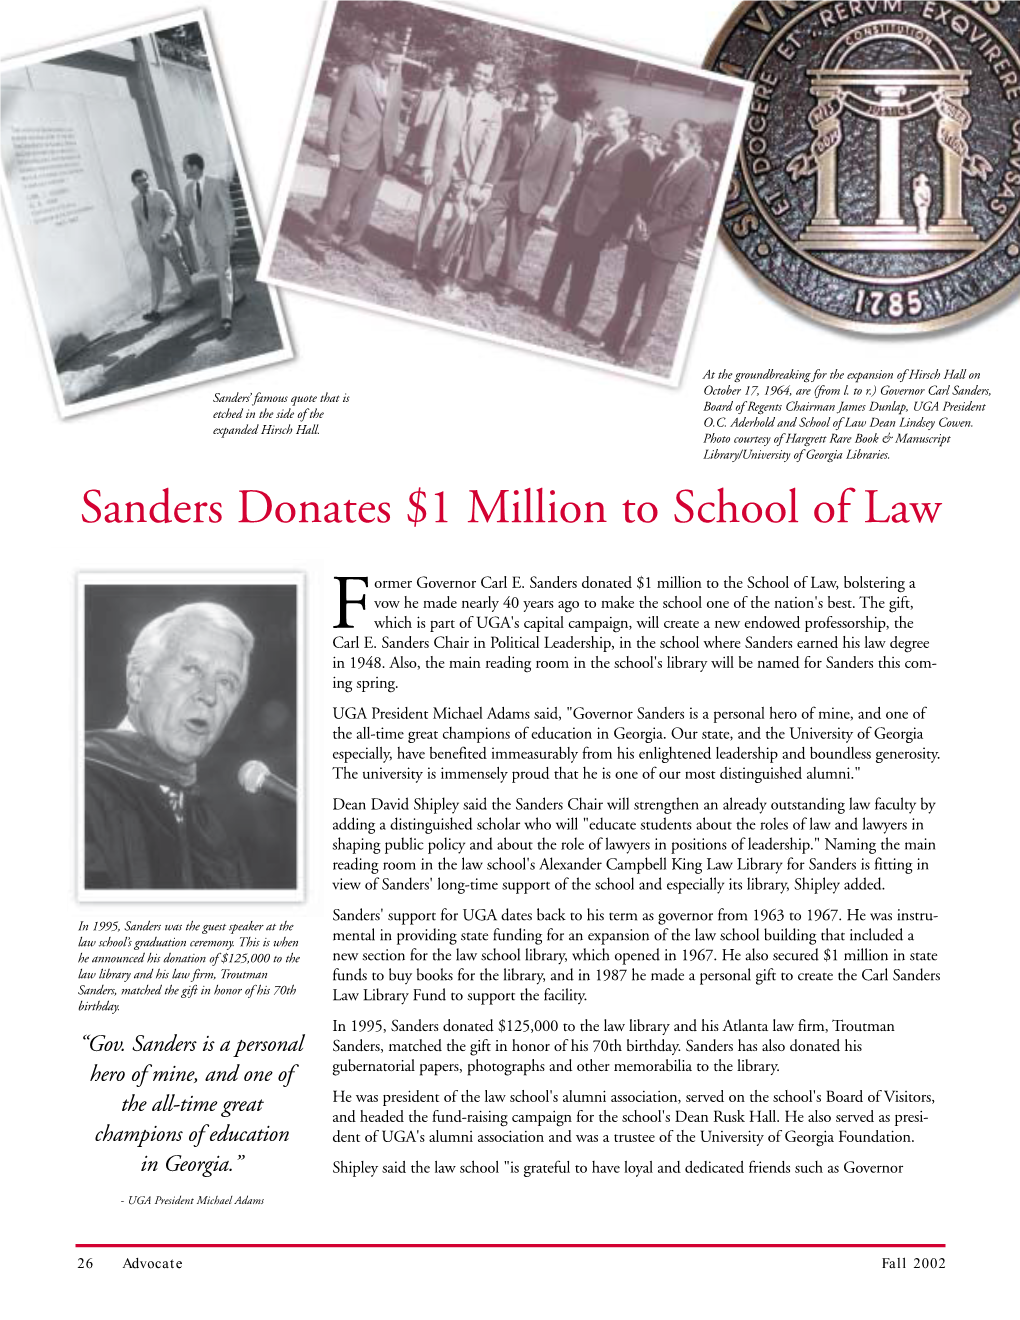 Sanders Donates $1 Million to the School of Law Pp.26-27